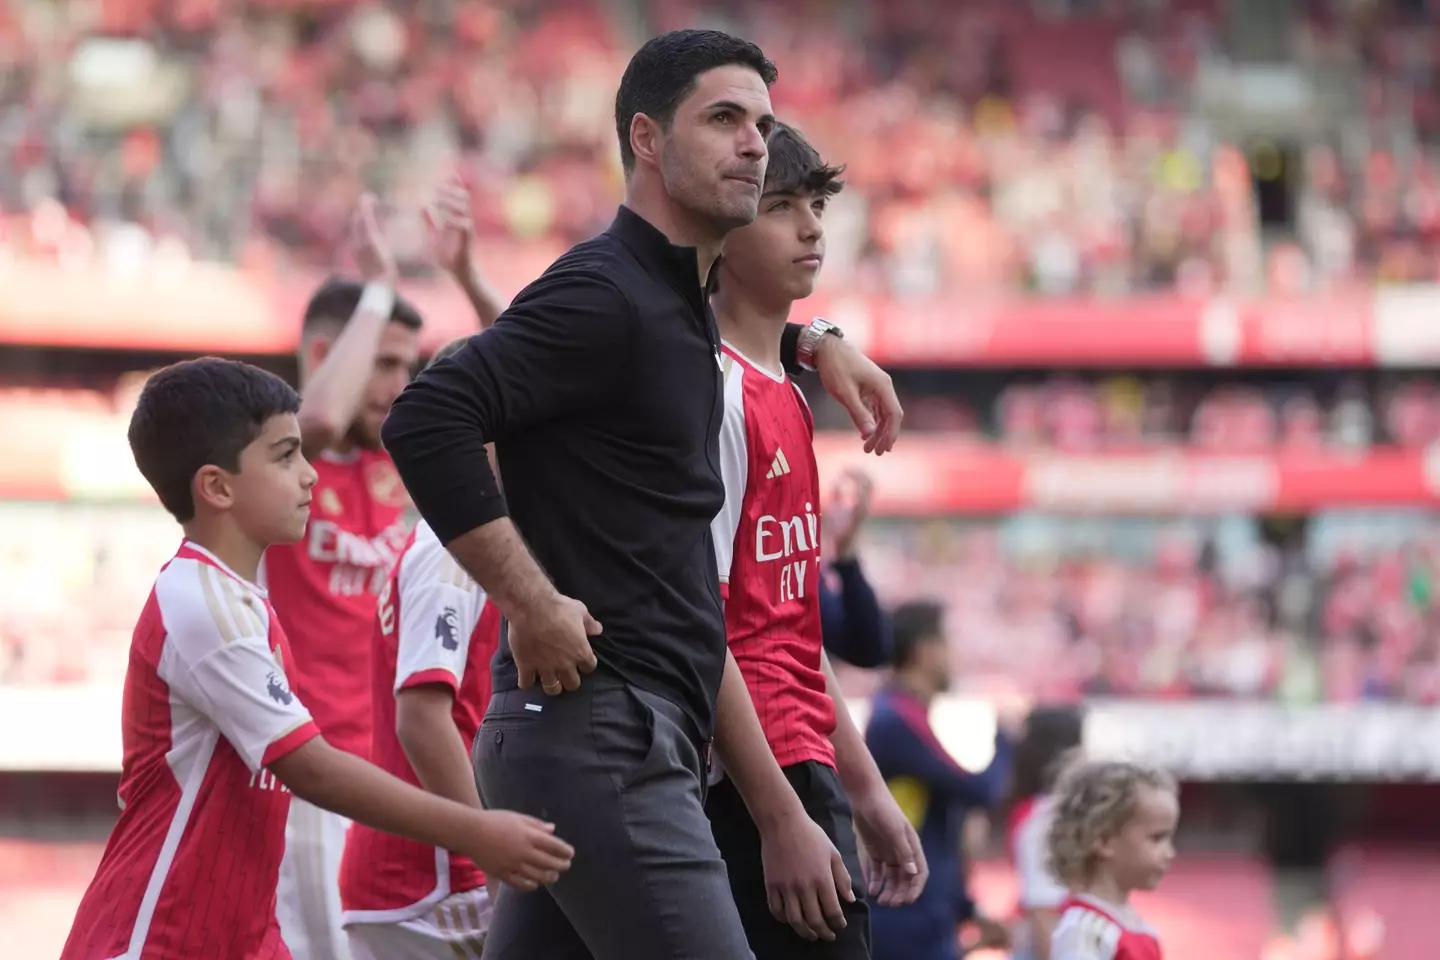 Mikel Arteta has transformed Arsenal's fortunes as manager. Image: Alamy